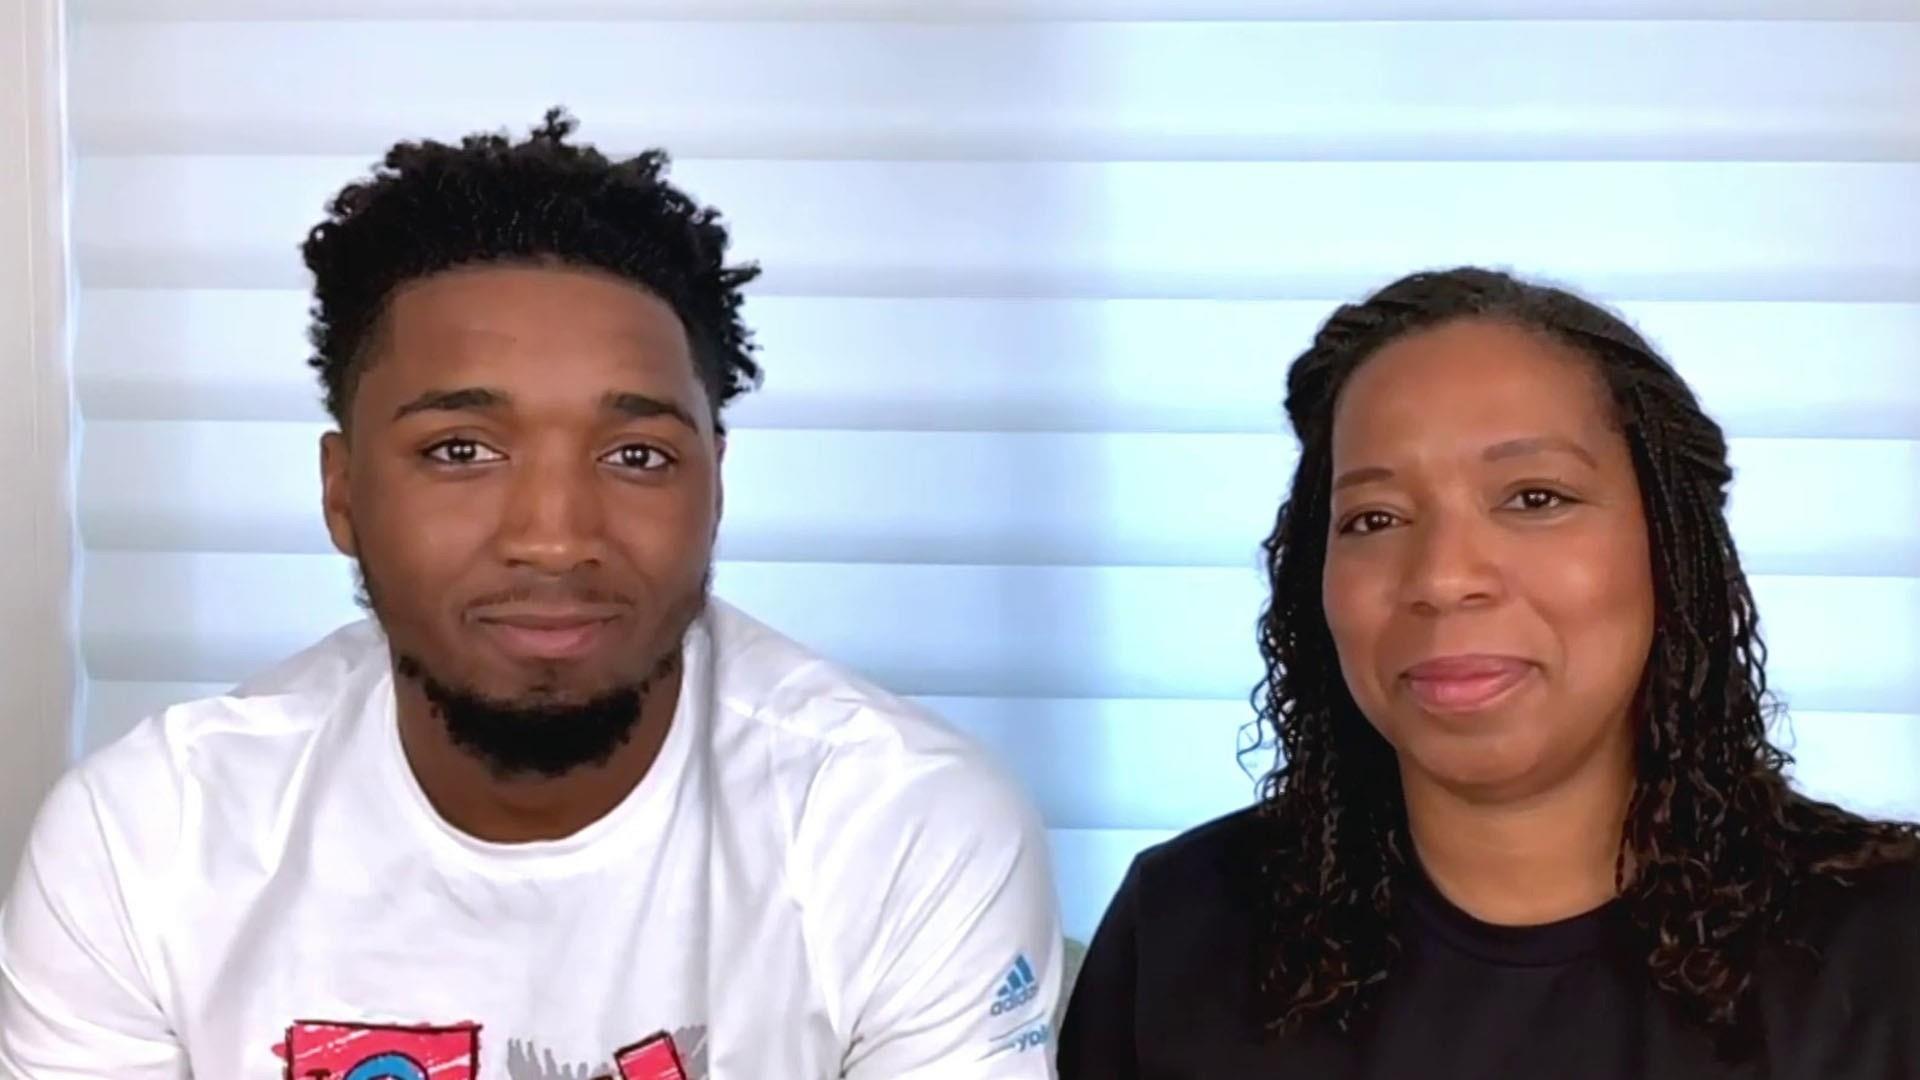 Donovan Mitchell has learned the value of education from his mom